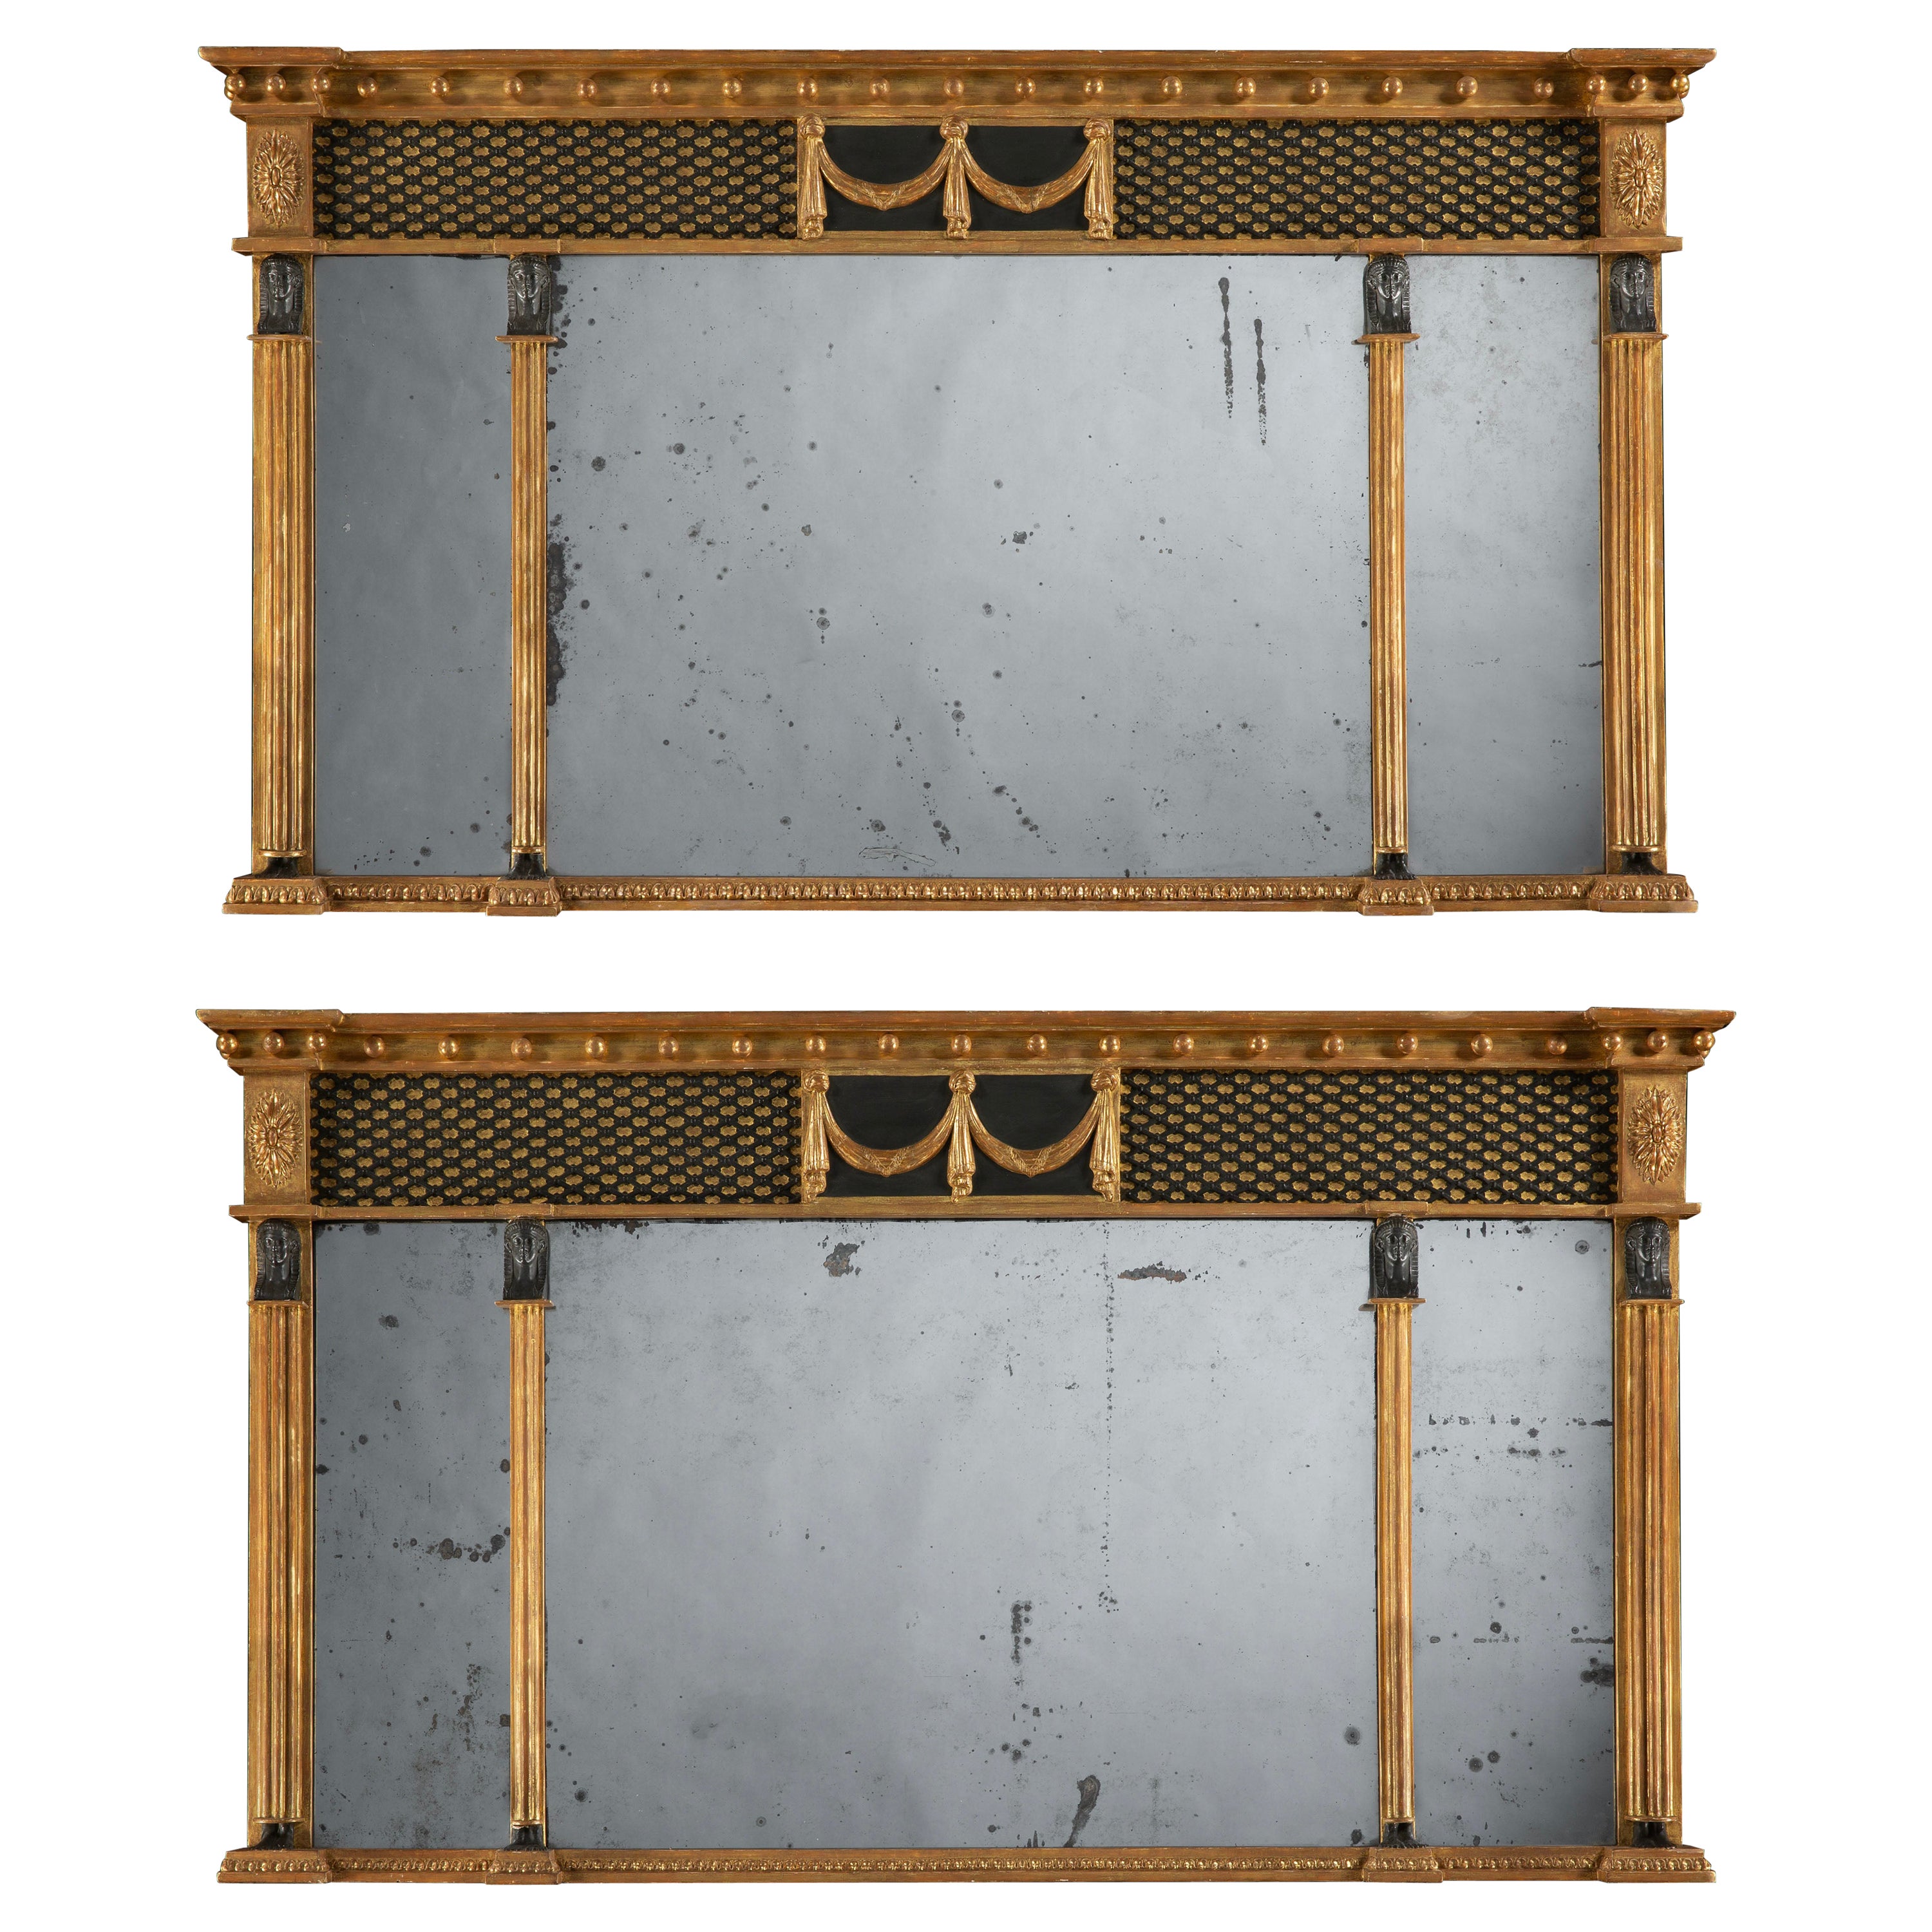 Rare Pair of Early 19th Century Regency Period Mirrors